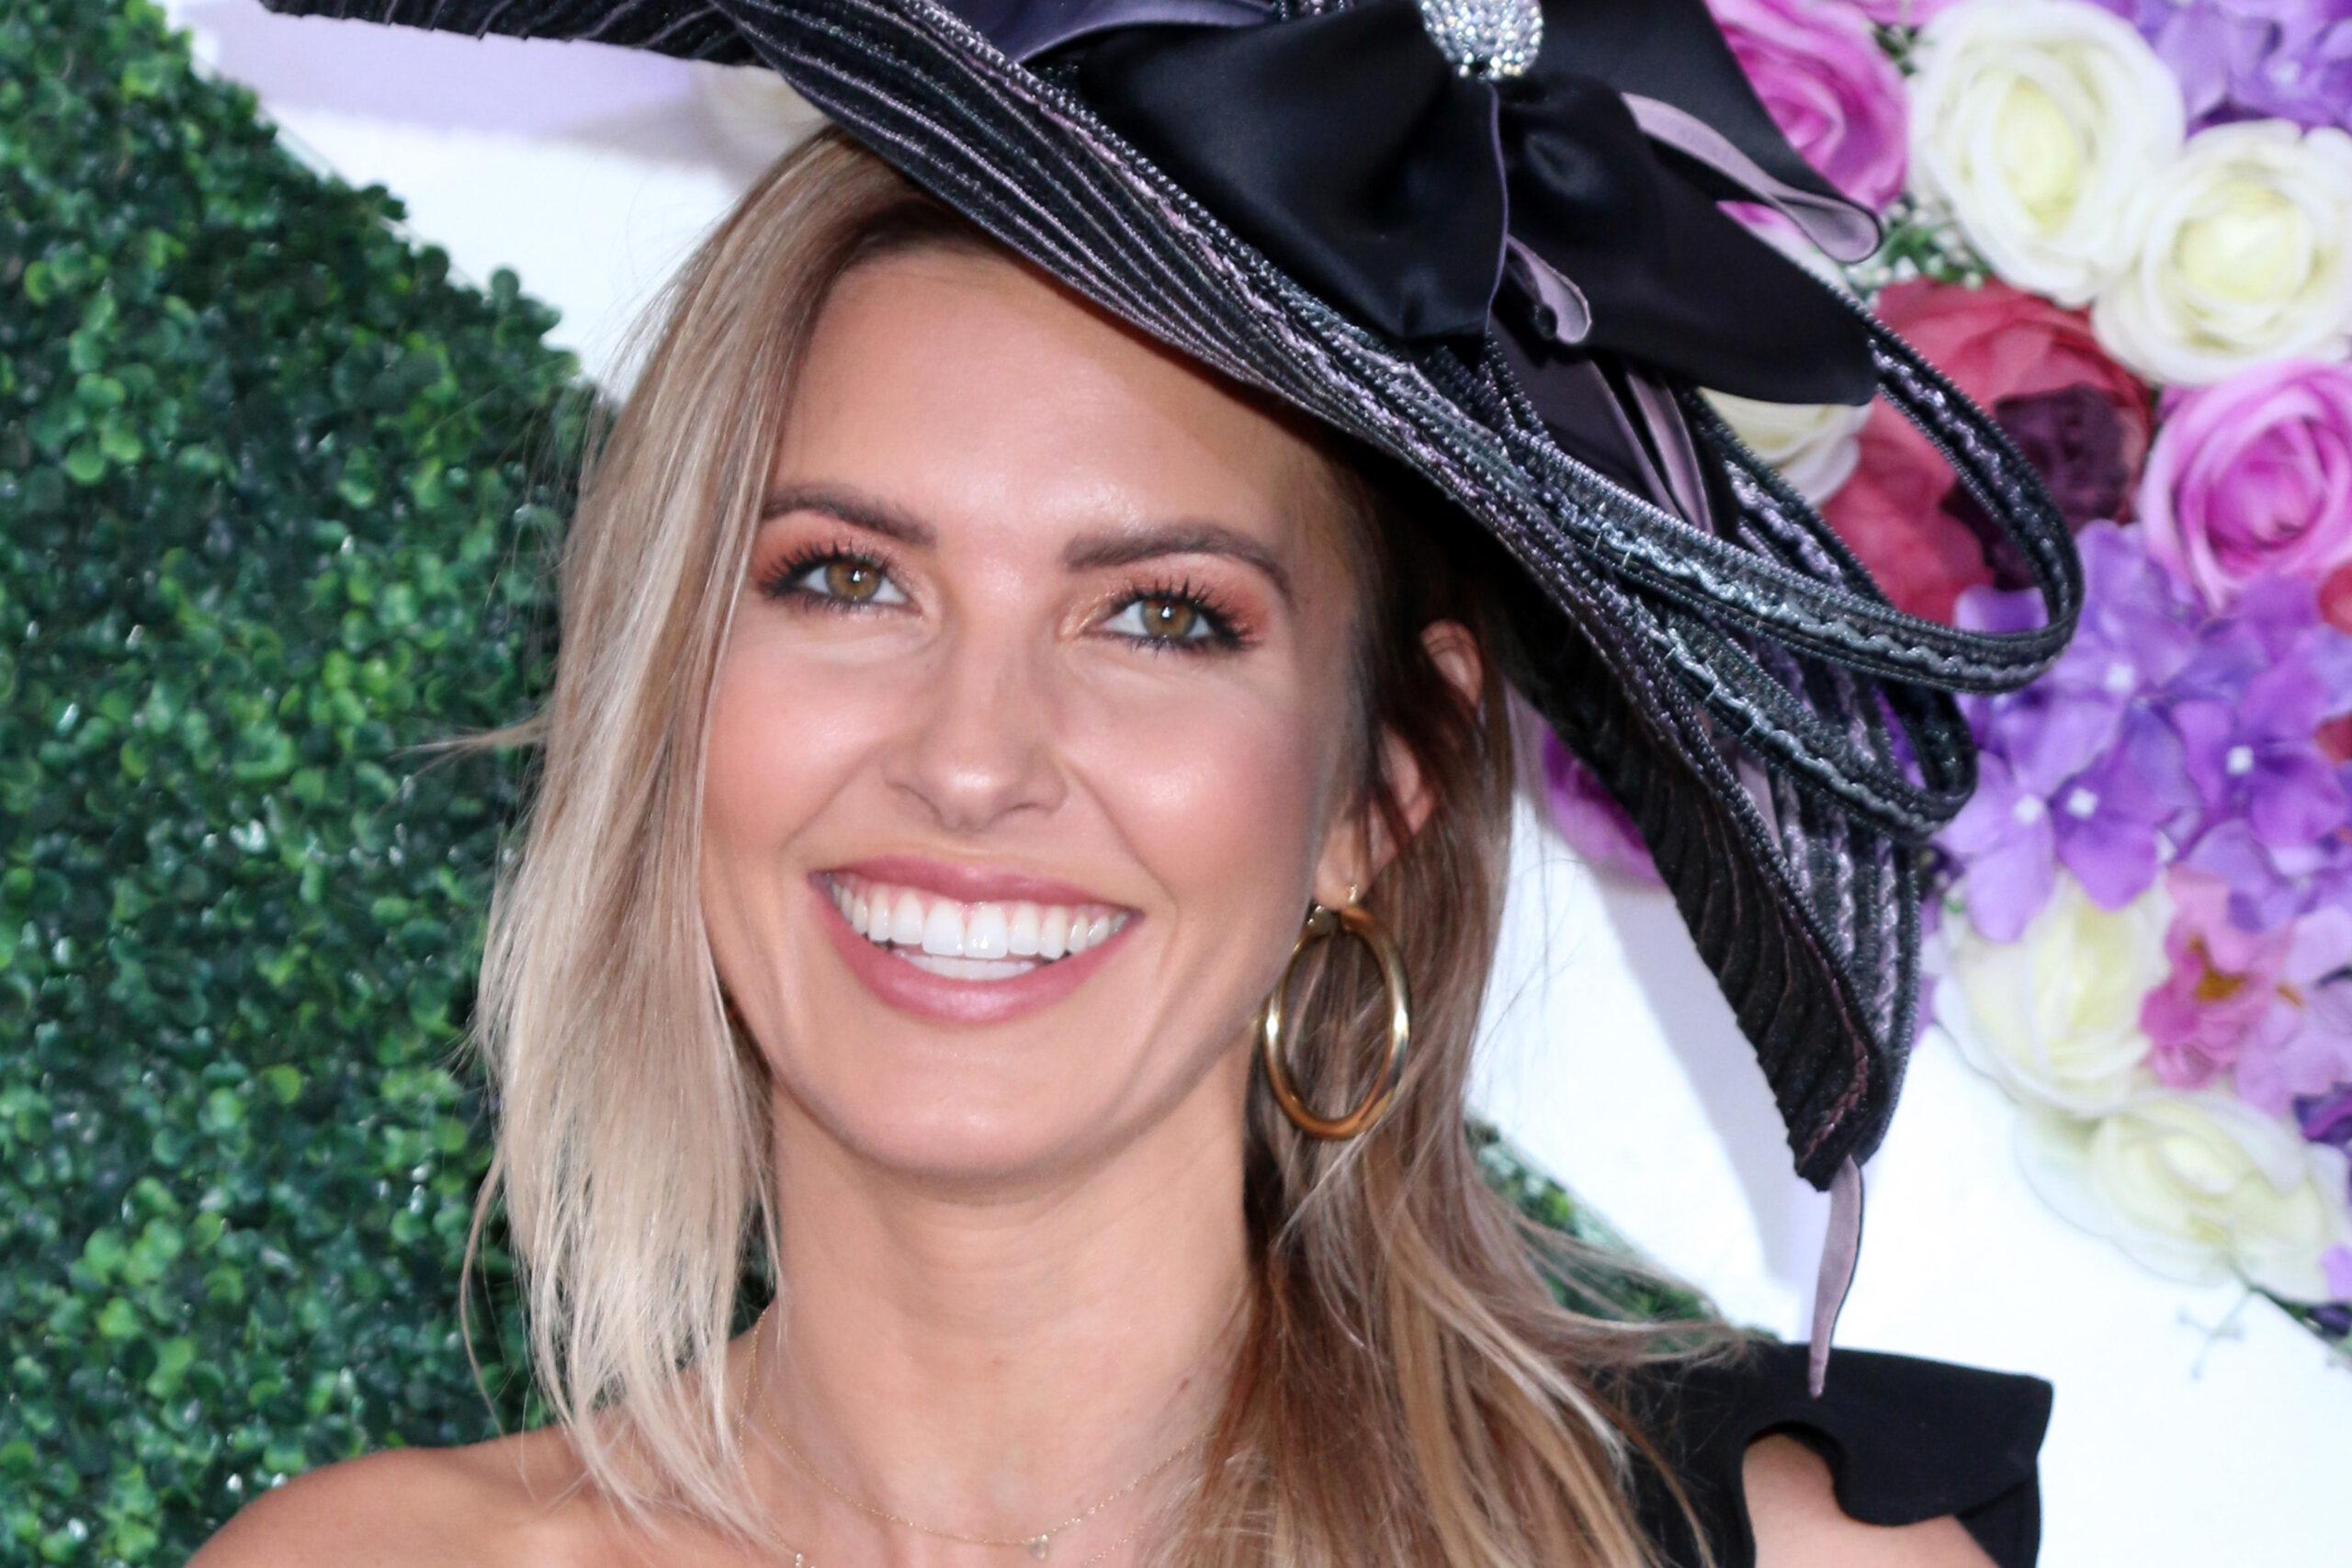 Audrina Patridge at the 2021 Breeders Cup Race at the Del Mar Racetrack on November 6, 2021 in Del Mar, CA